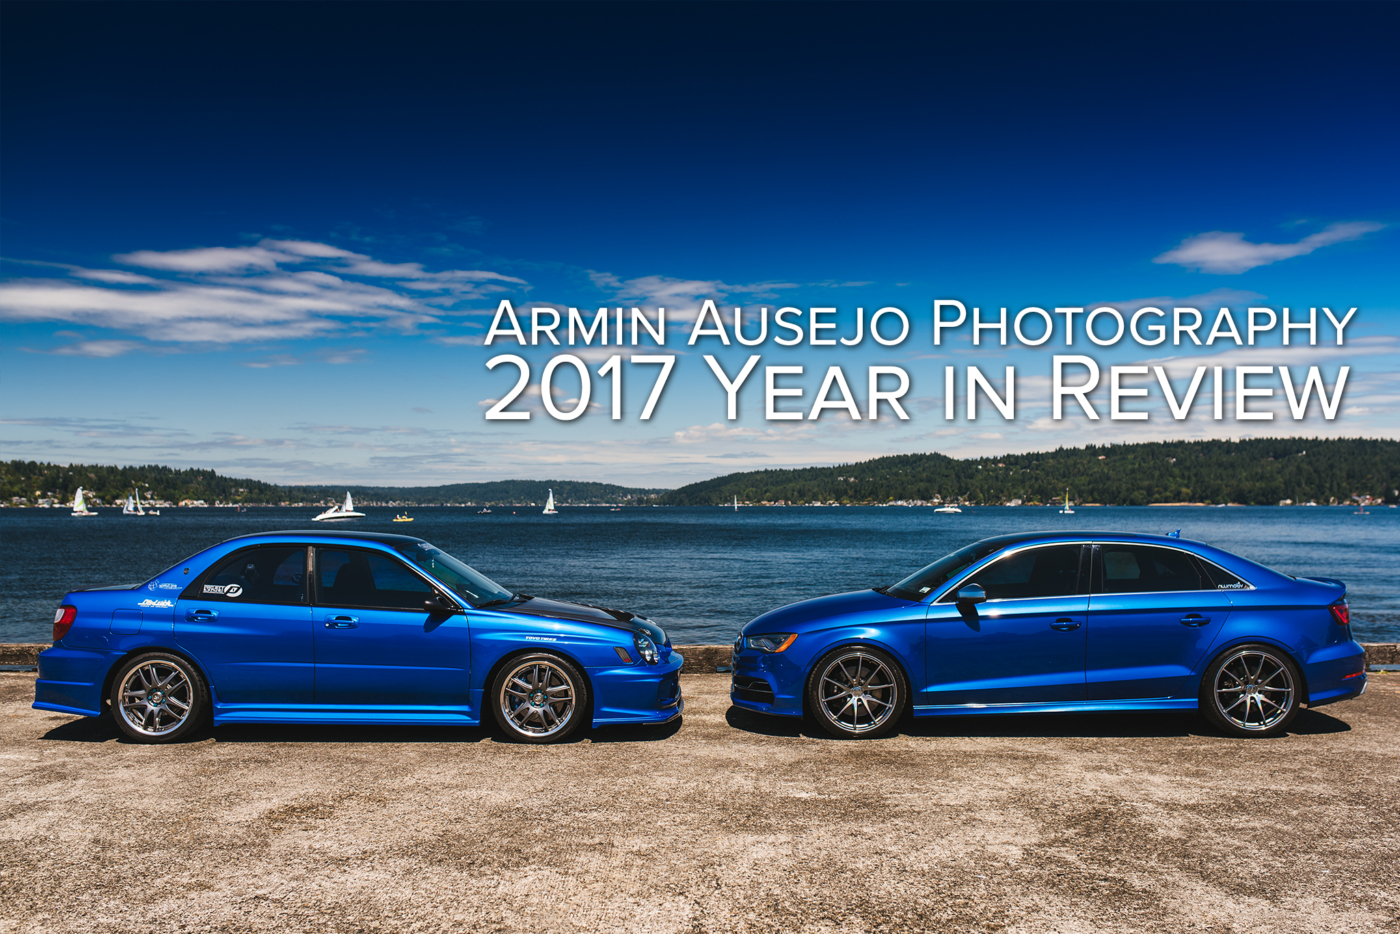 Armin Ausejo Photography 2017 Year in Review